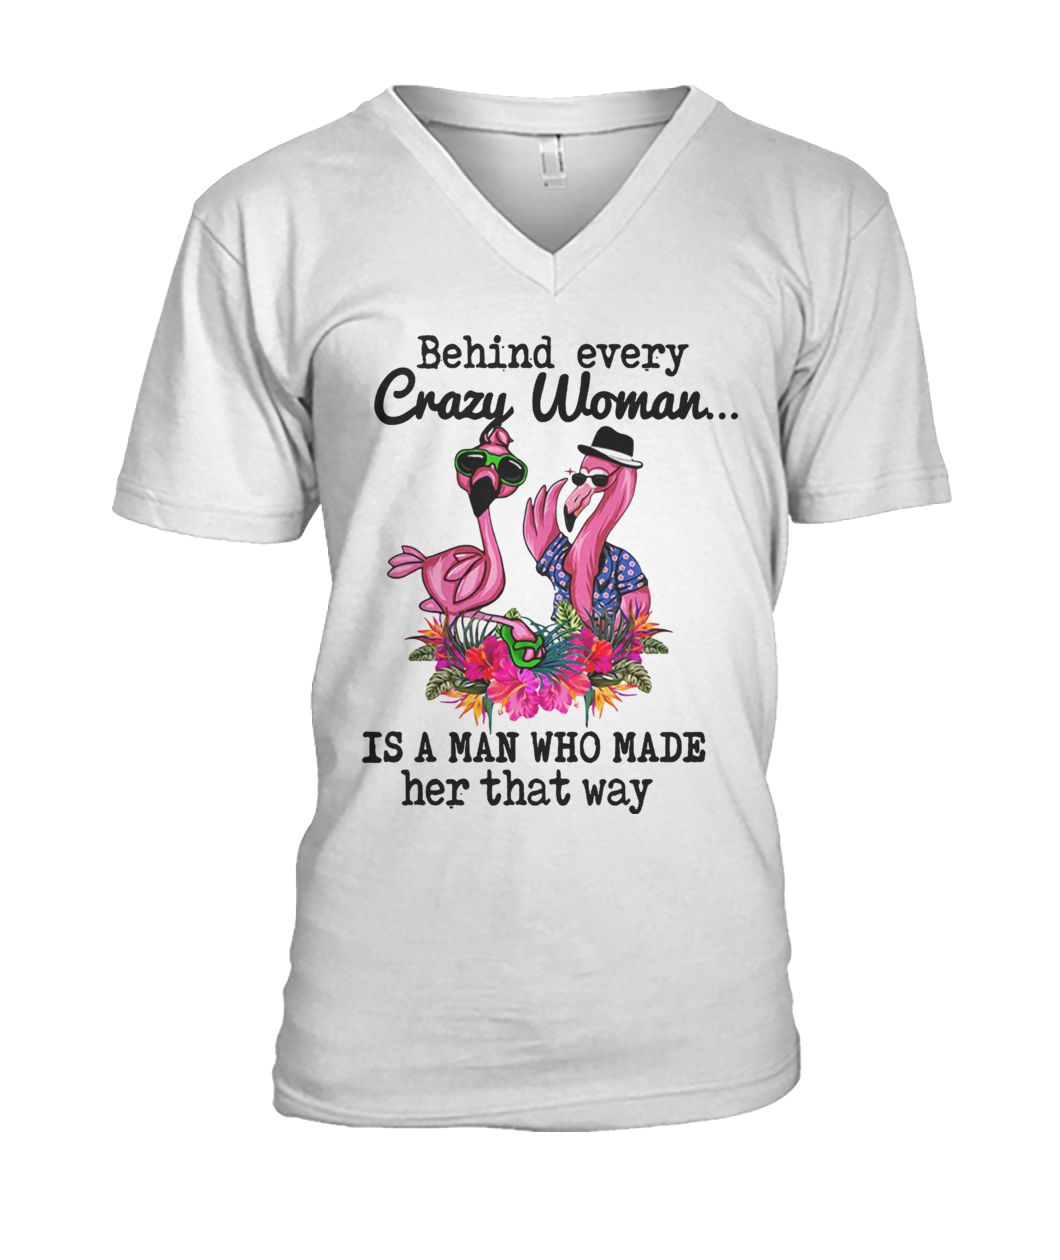 Flamingo behind every crazy woman is a man who made her that way mens v-neck